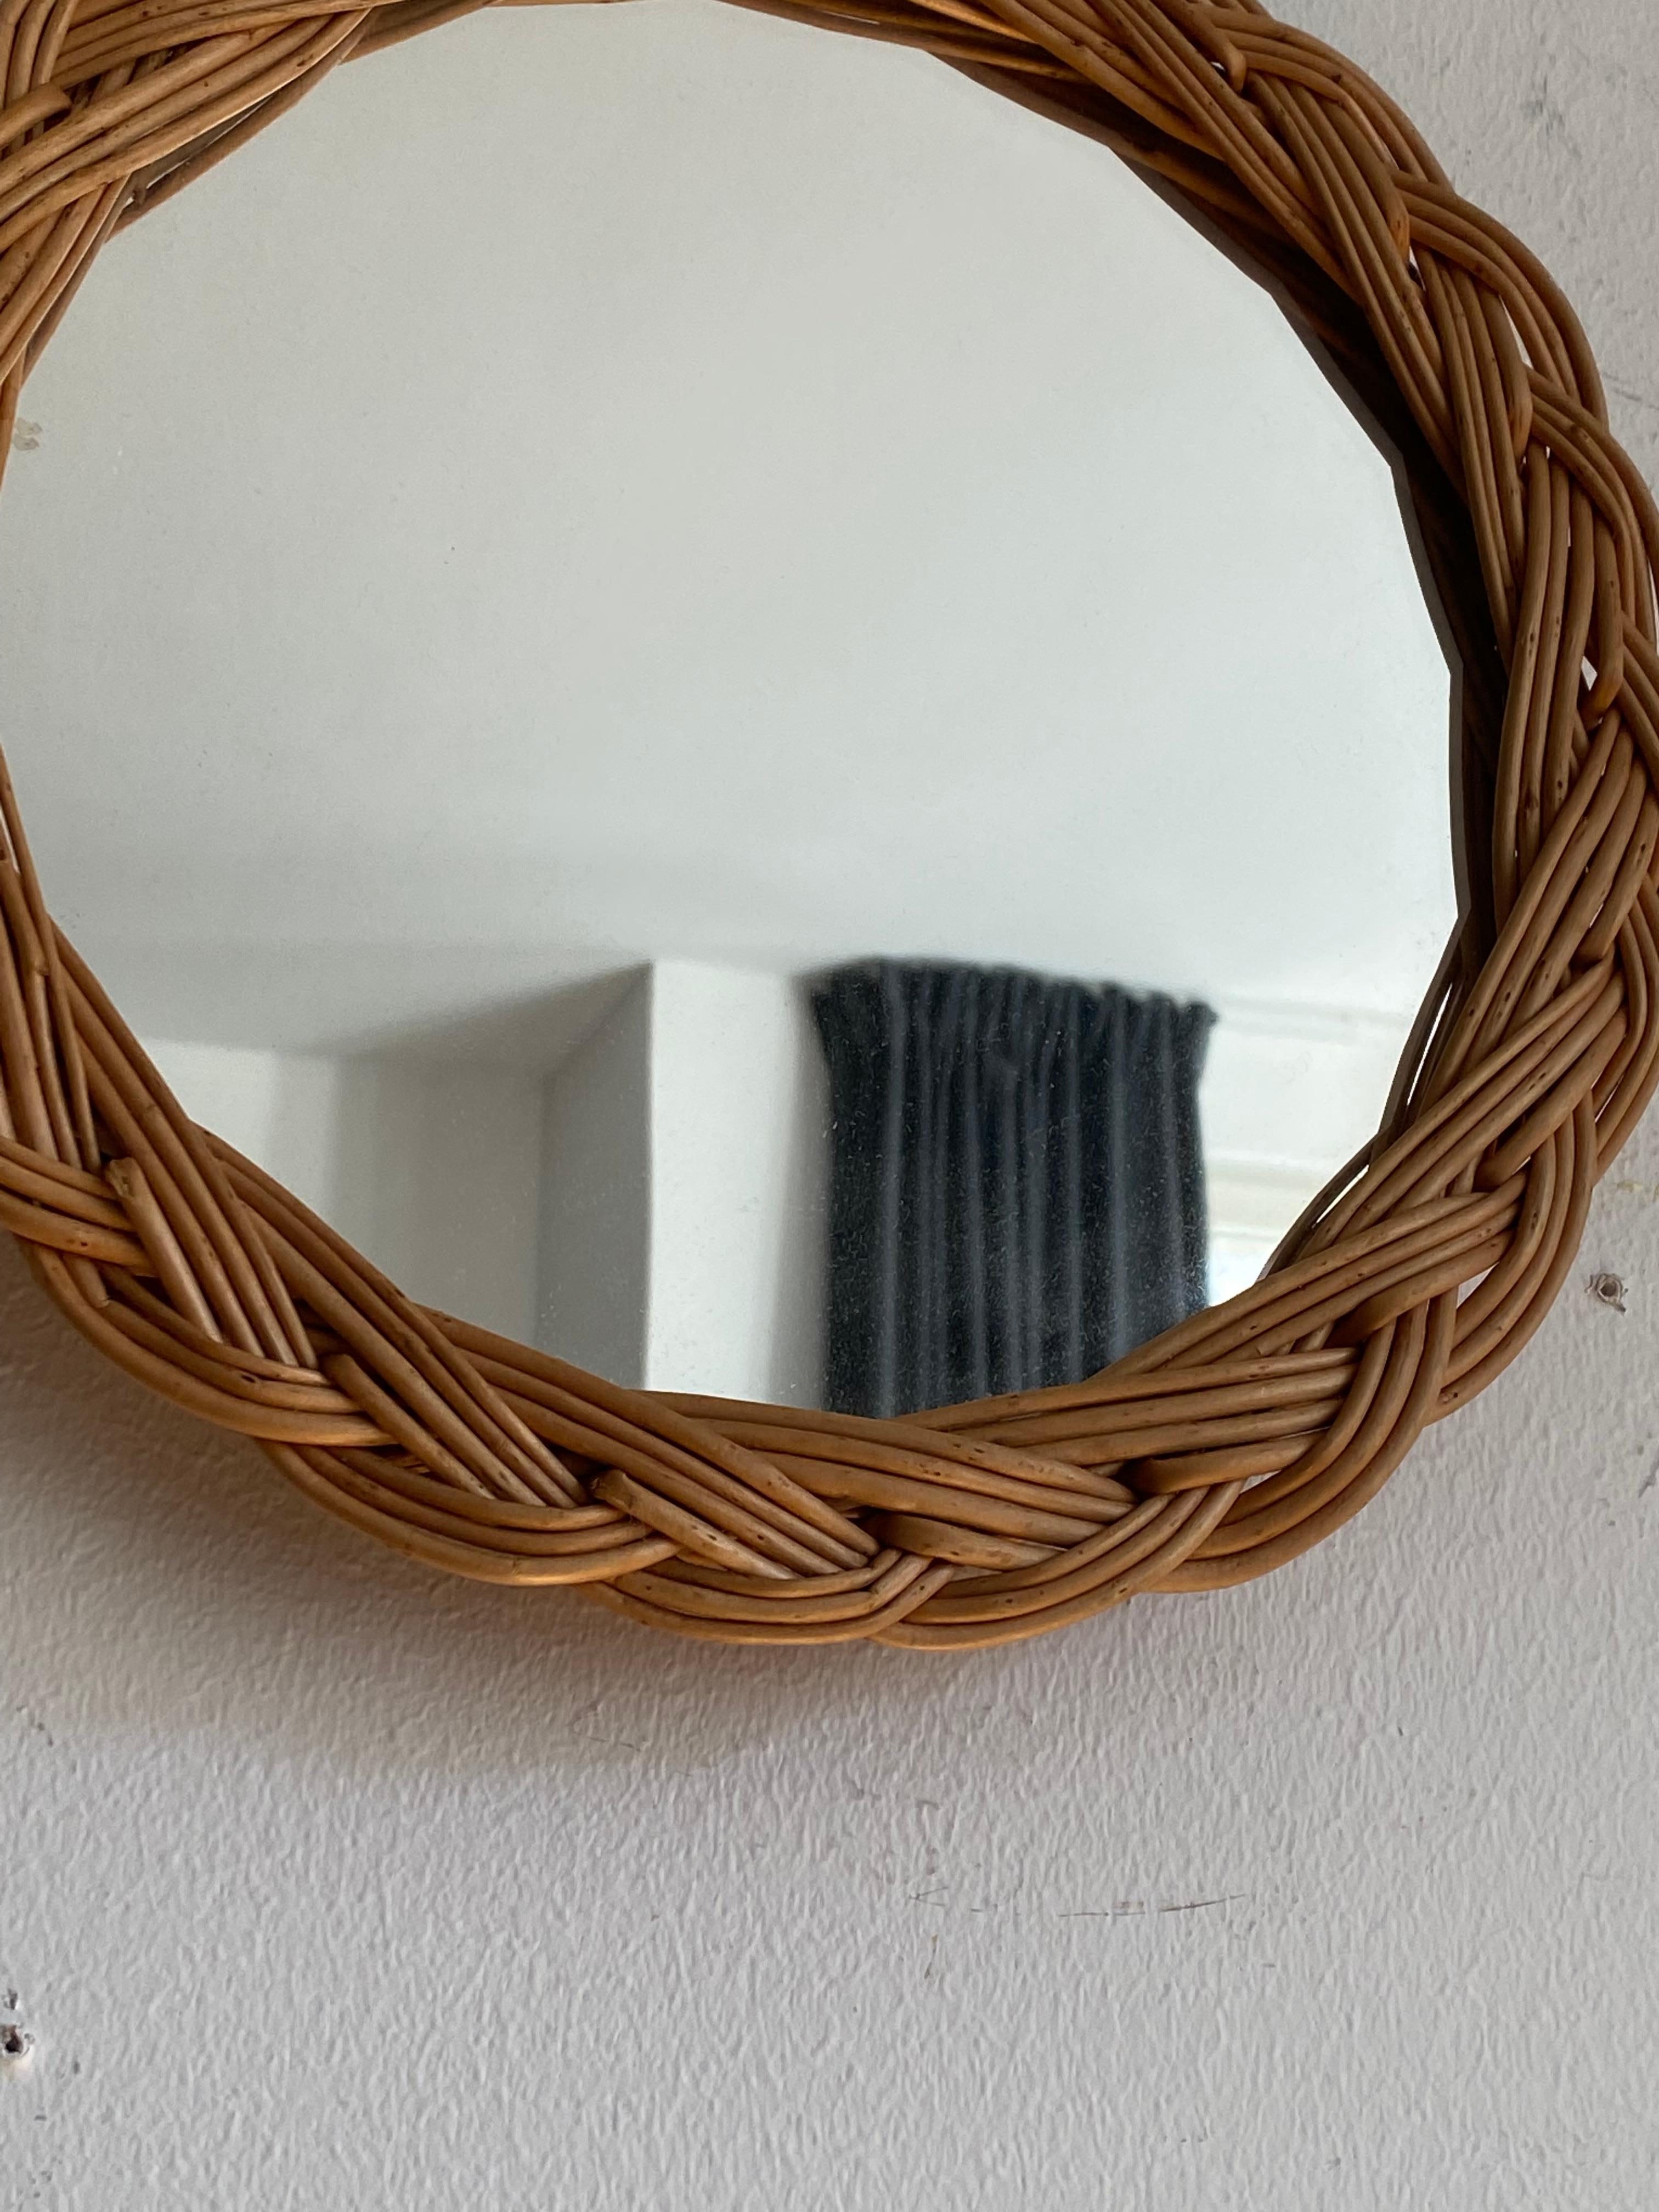 A wall mirror, produced in Italy, c. 1970s. Cut mirror glass is framed in rattan.

Other designers of the period include Gio Ponti, Fontana Arte, Max Ingrand, Franco Albini, and Josef Frank.